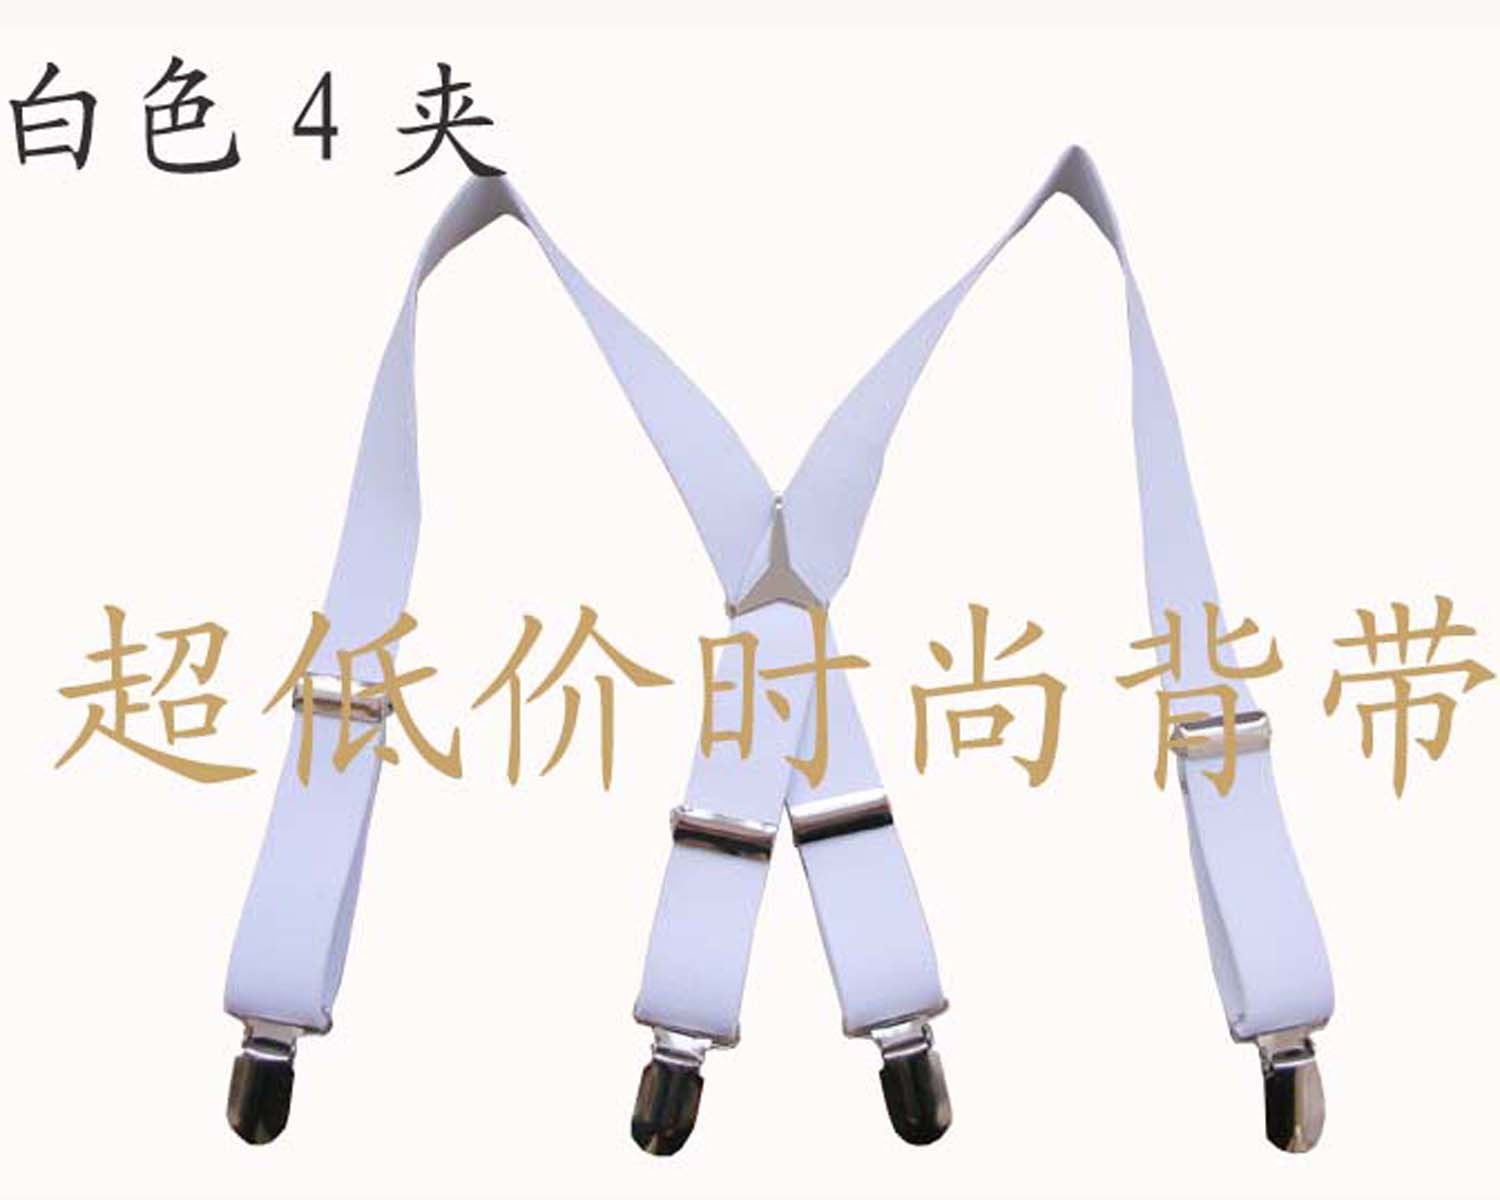 Fashion suspenders women's classic casual all-match women's suspenders clip shoulder strap Free Shipping